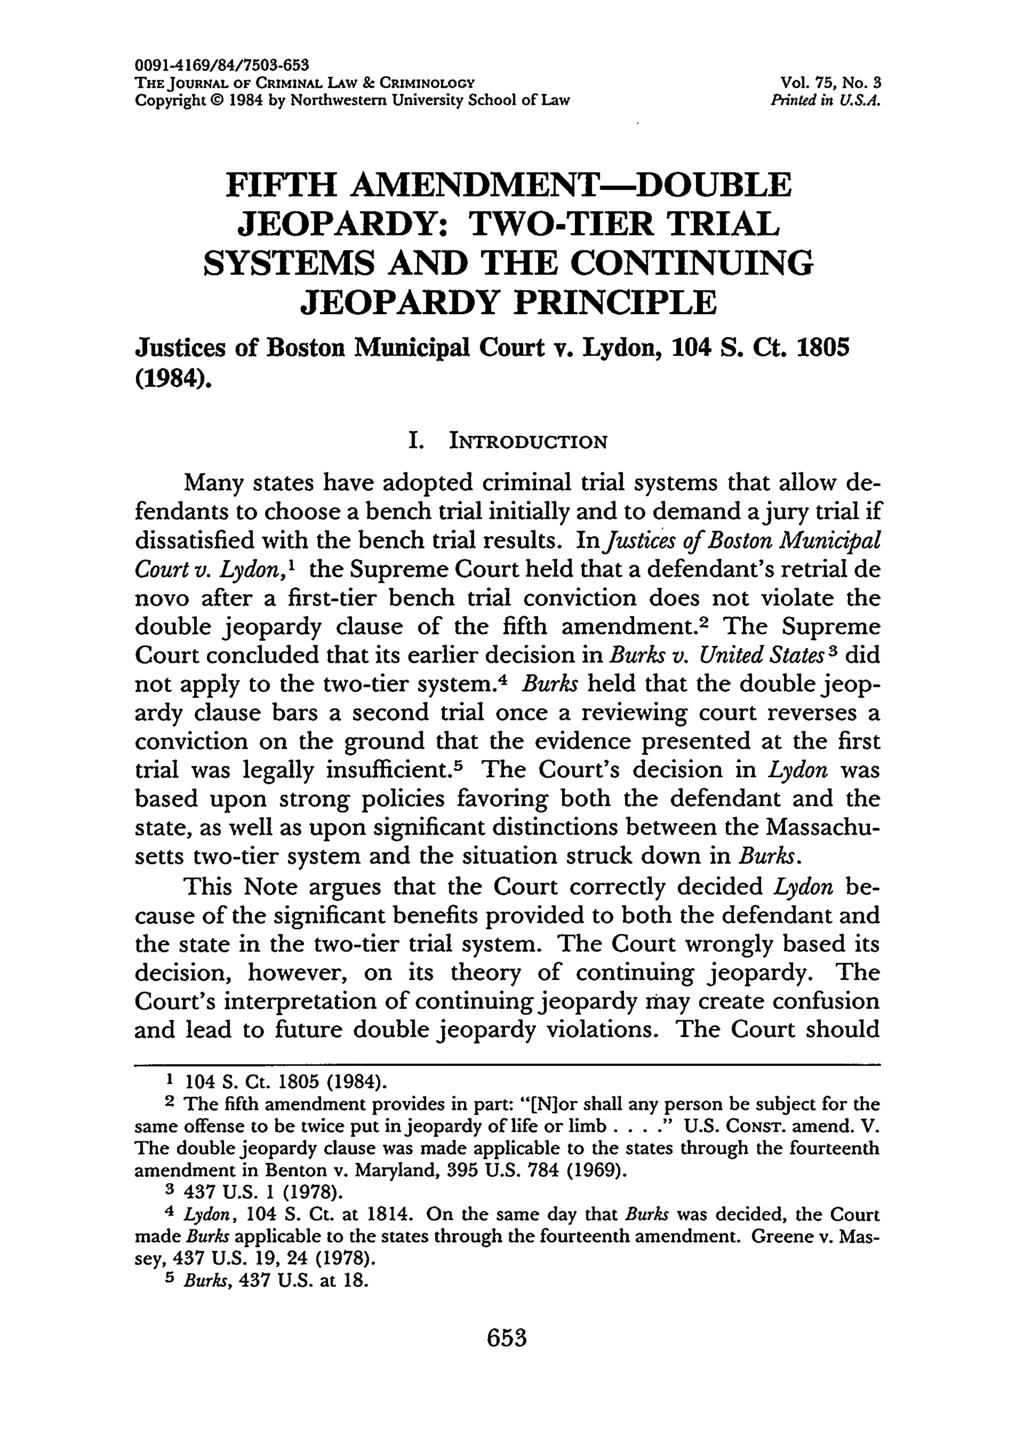 0091-4169/84/7503-653 THE JOURNAL OF CRIMINAL LAW & CRIMINOLOGY Vol. 75, No. 3 Copyright 0 1984 by Northwestern University School of Law Printed in U.S.A. FIFTH AMENDMENT-DOUBLE JEOPARDY: TWO-TIER TRIAL SYSTEMS AND THE CONTINUING JEOPARDY PRINCIPLE Justices of Boston Municipal Court v.